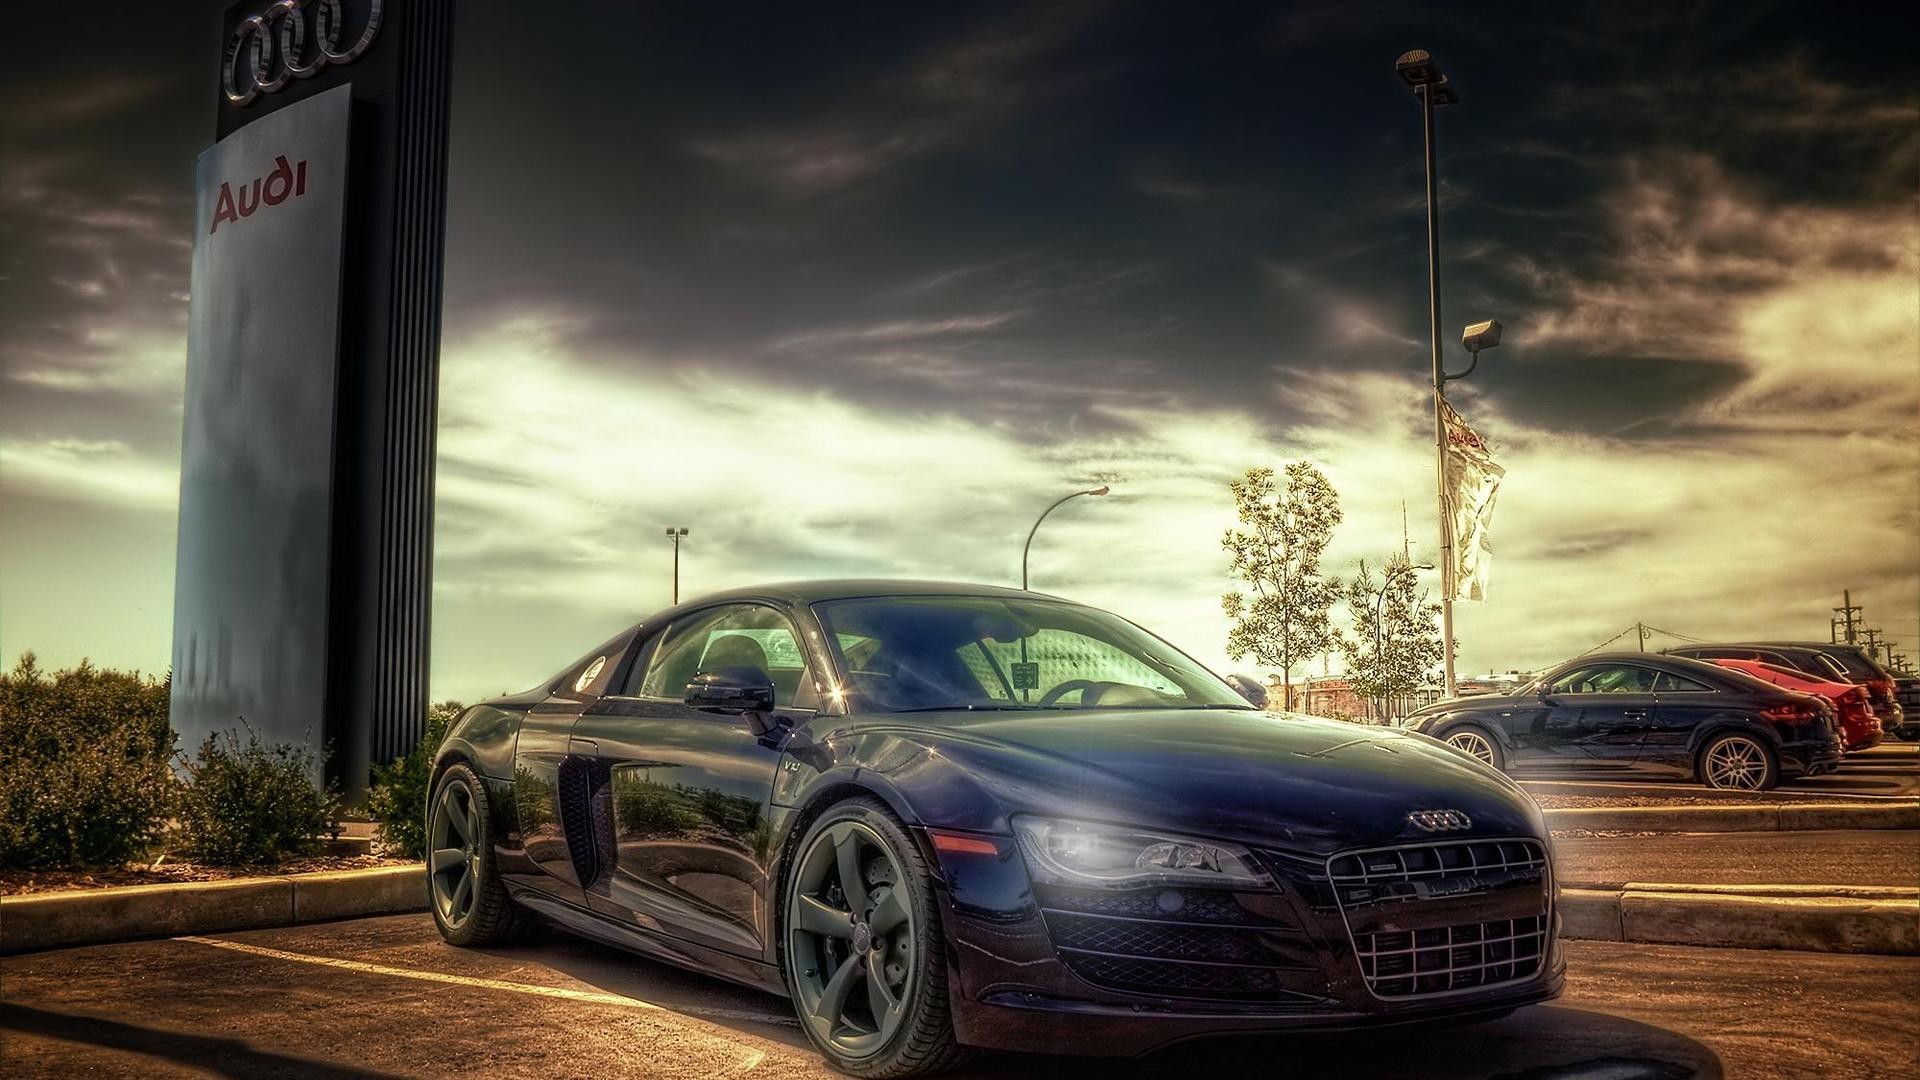 1920x1080 Cars parking HDR photography Audi R8 V10 wallpaper |  | 184977 |  WallpaperUP